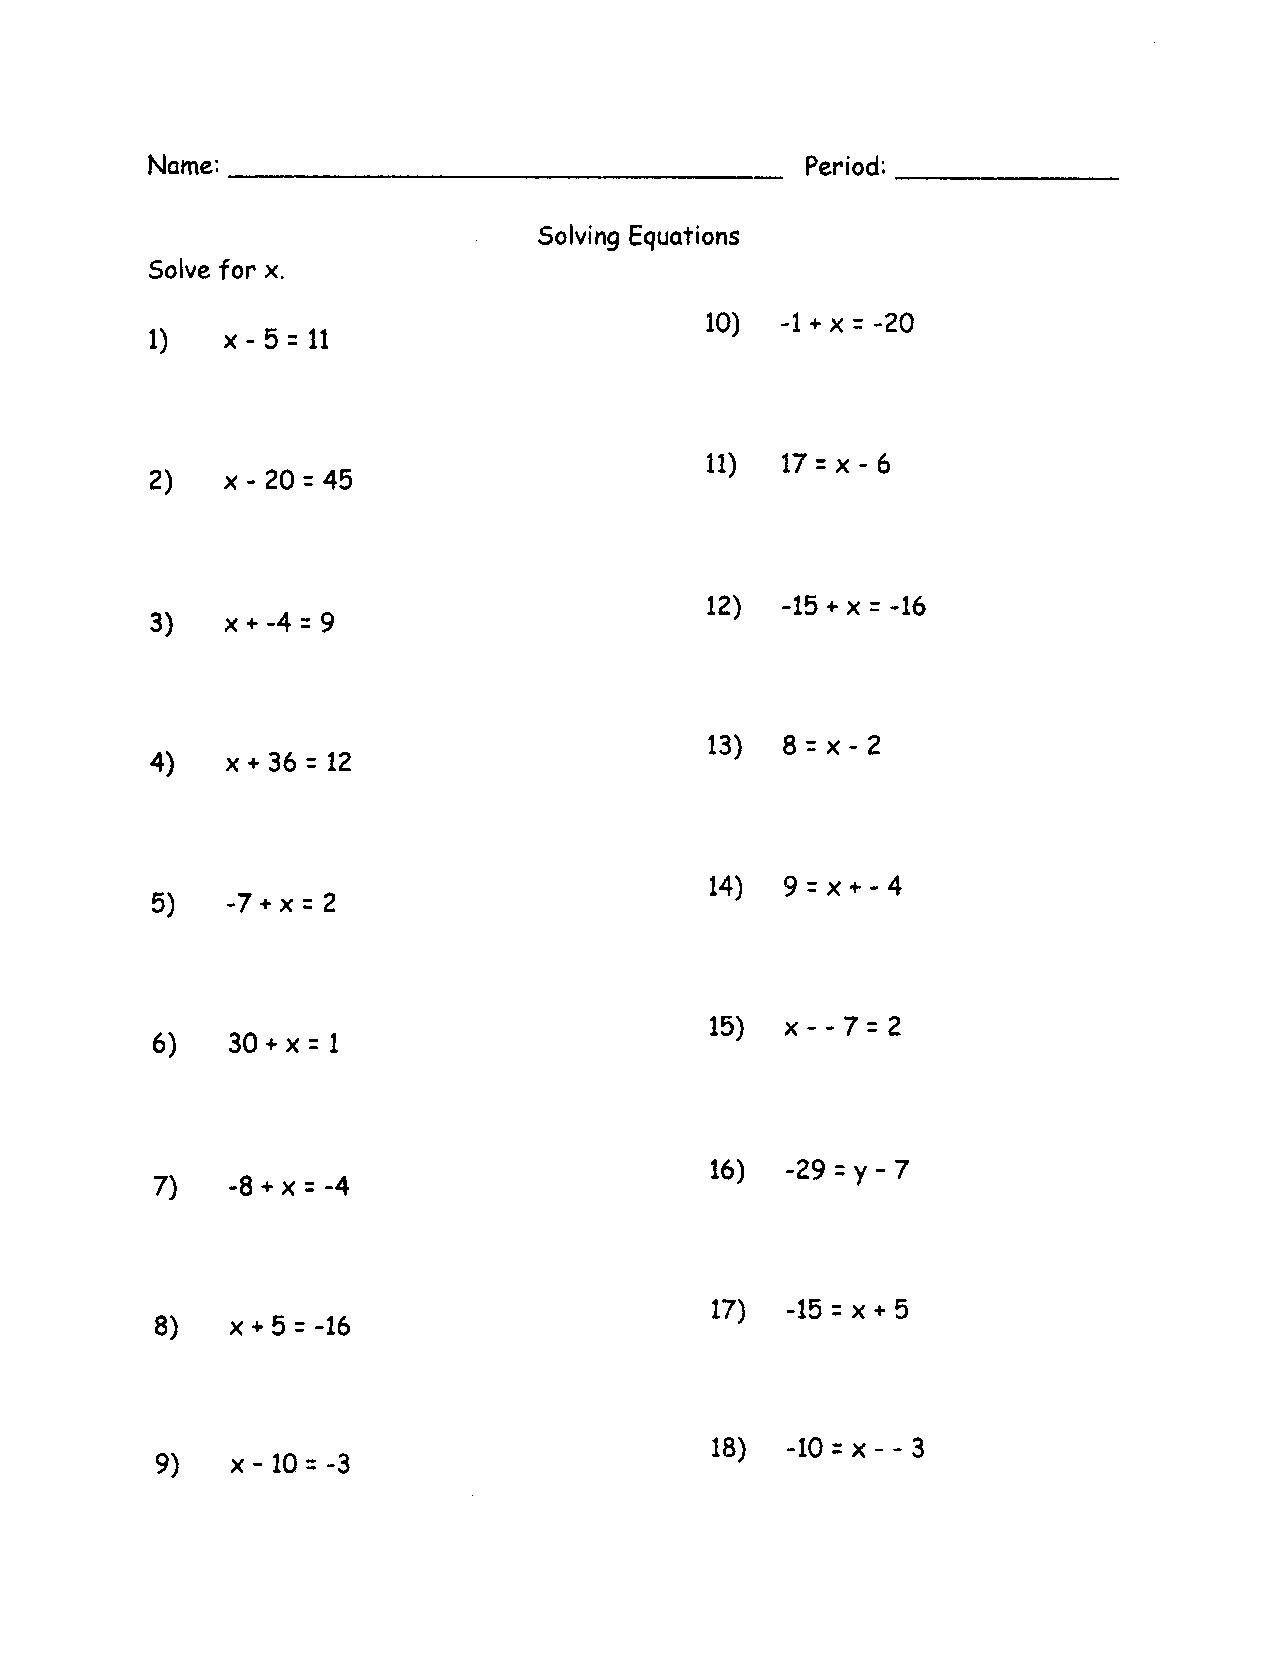 Solving Equations With Variables On Both Sides Worksheet Answer Key For Solving Equations With Variables On Both Sides Worksheet Answers